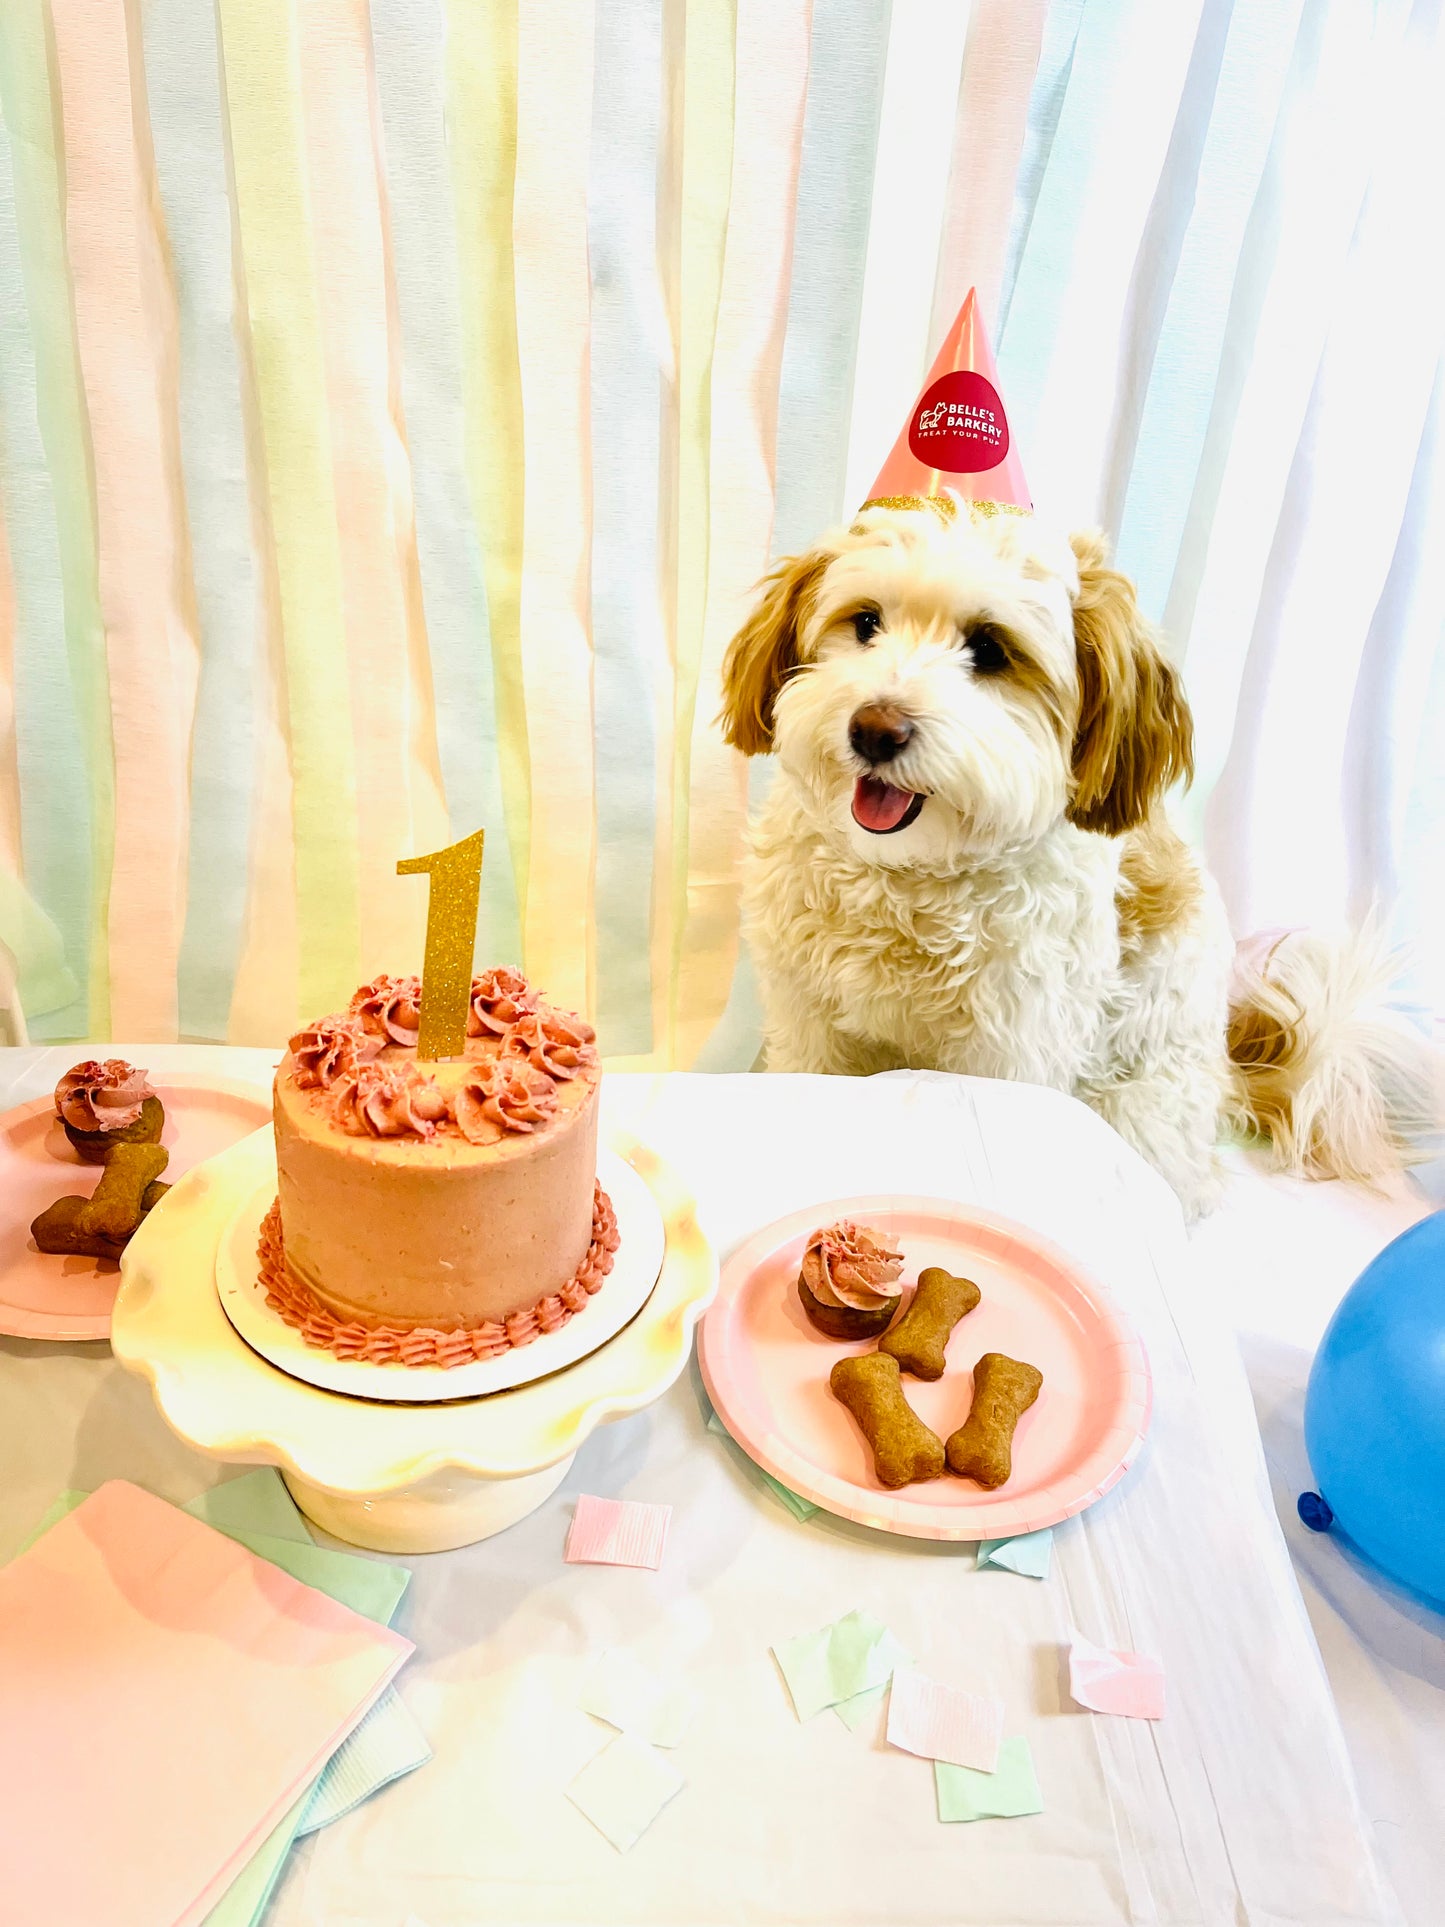 Dog having a birthday party. Custom dog cake with pink icing is decorated with a gold glitter "one" number cake topper. 